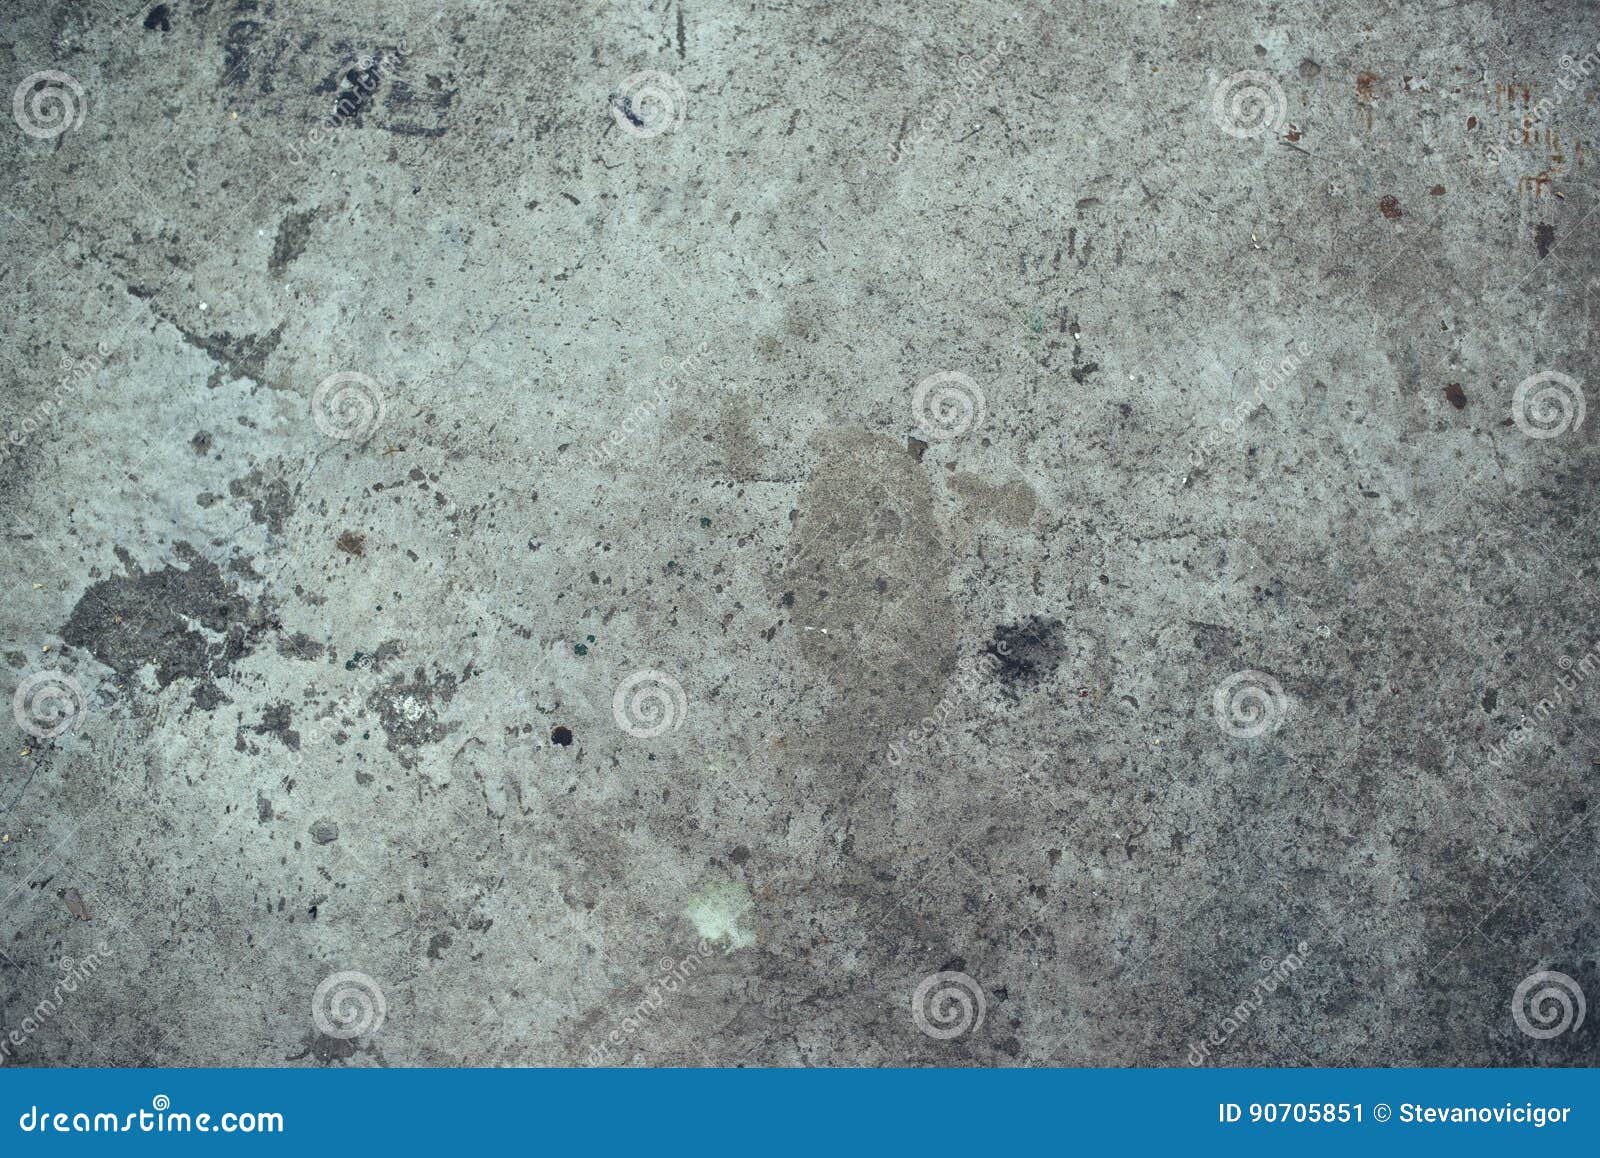 Grunge Cement Concrete Flooring Background Stock Image Image Of